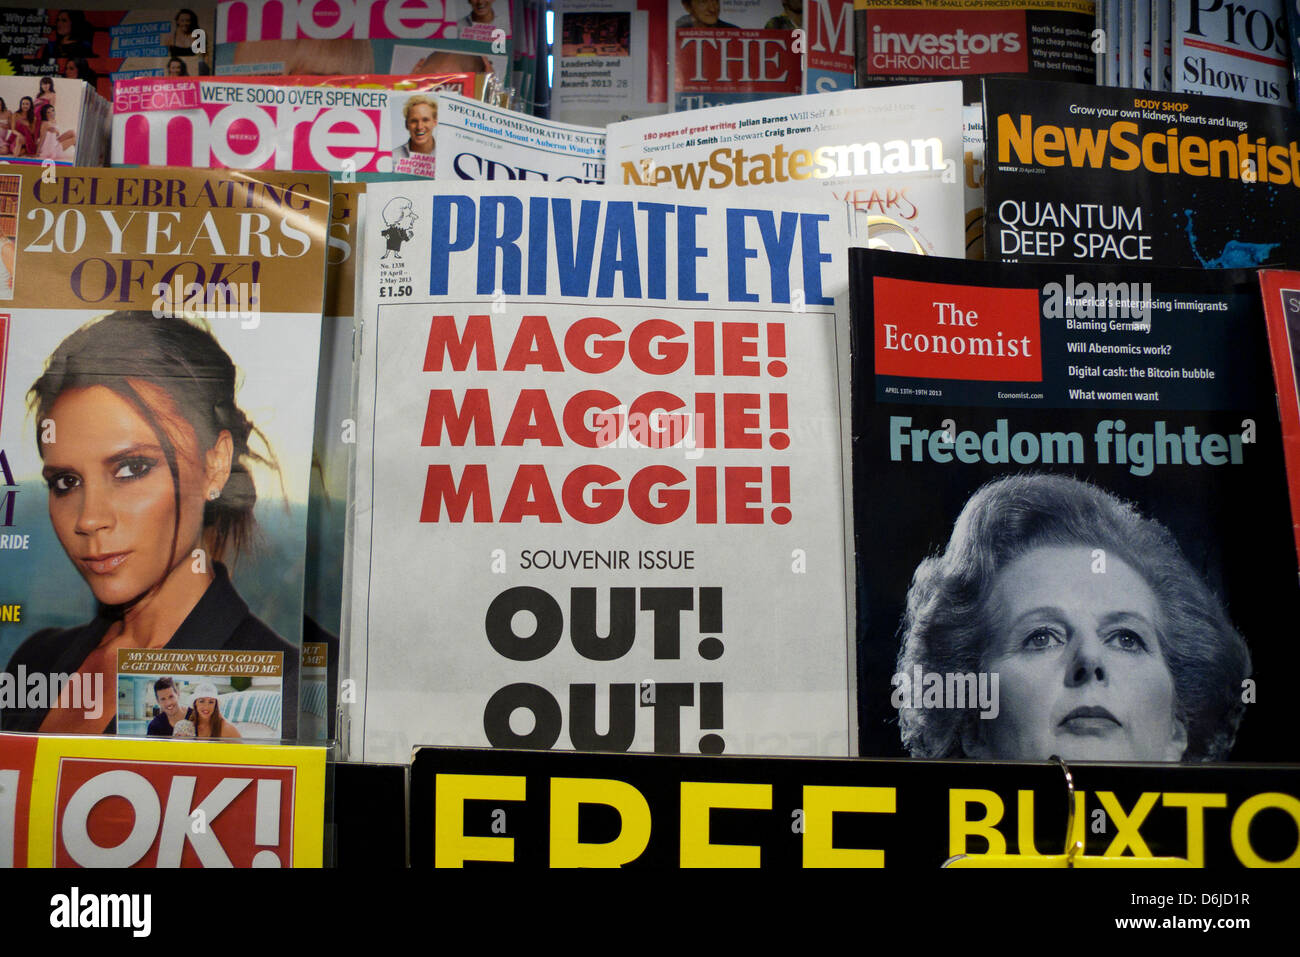 Mrs. Thatcher's portrait on the cover of The Economist Magazine and Private Eye's Souvenir Issue on a W.H. Smith newsstand 18 April 2013 Great Britain Stock Photo